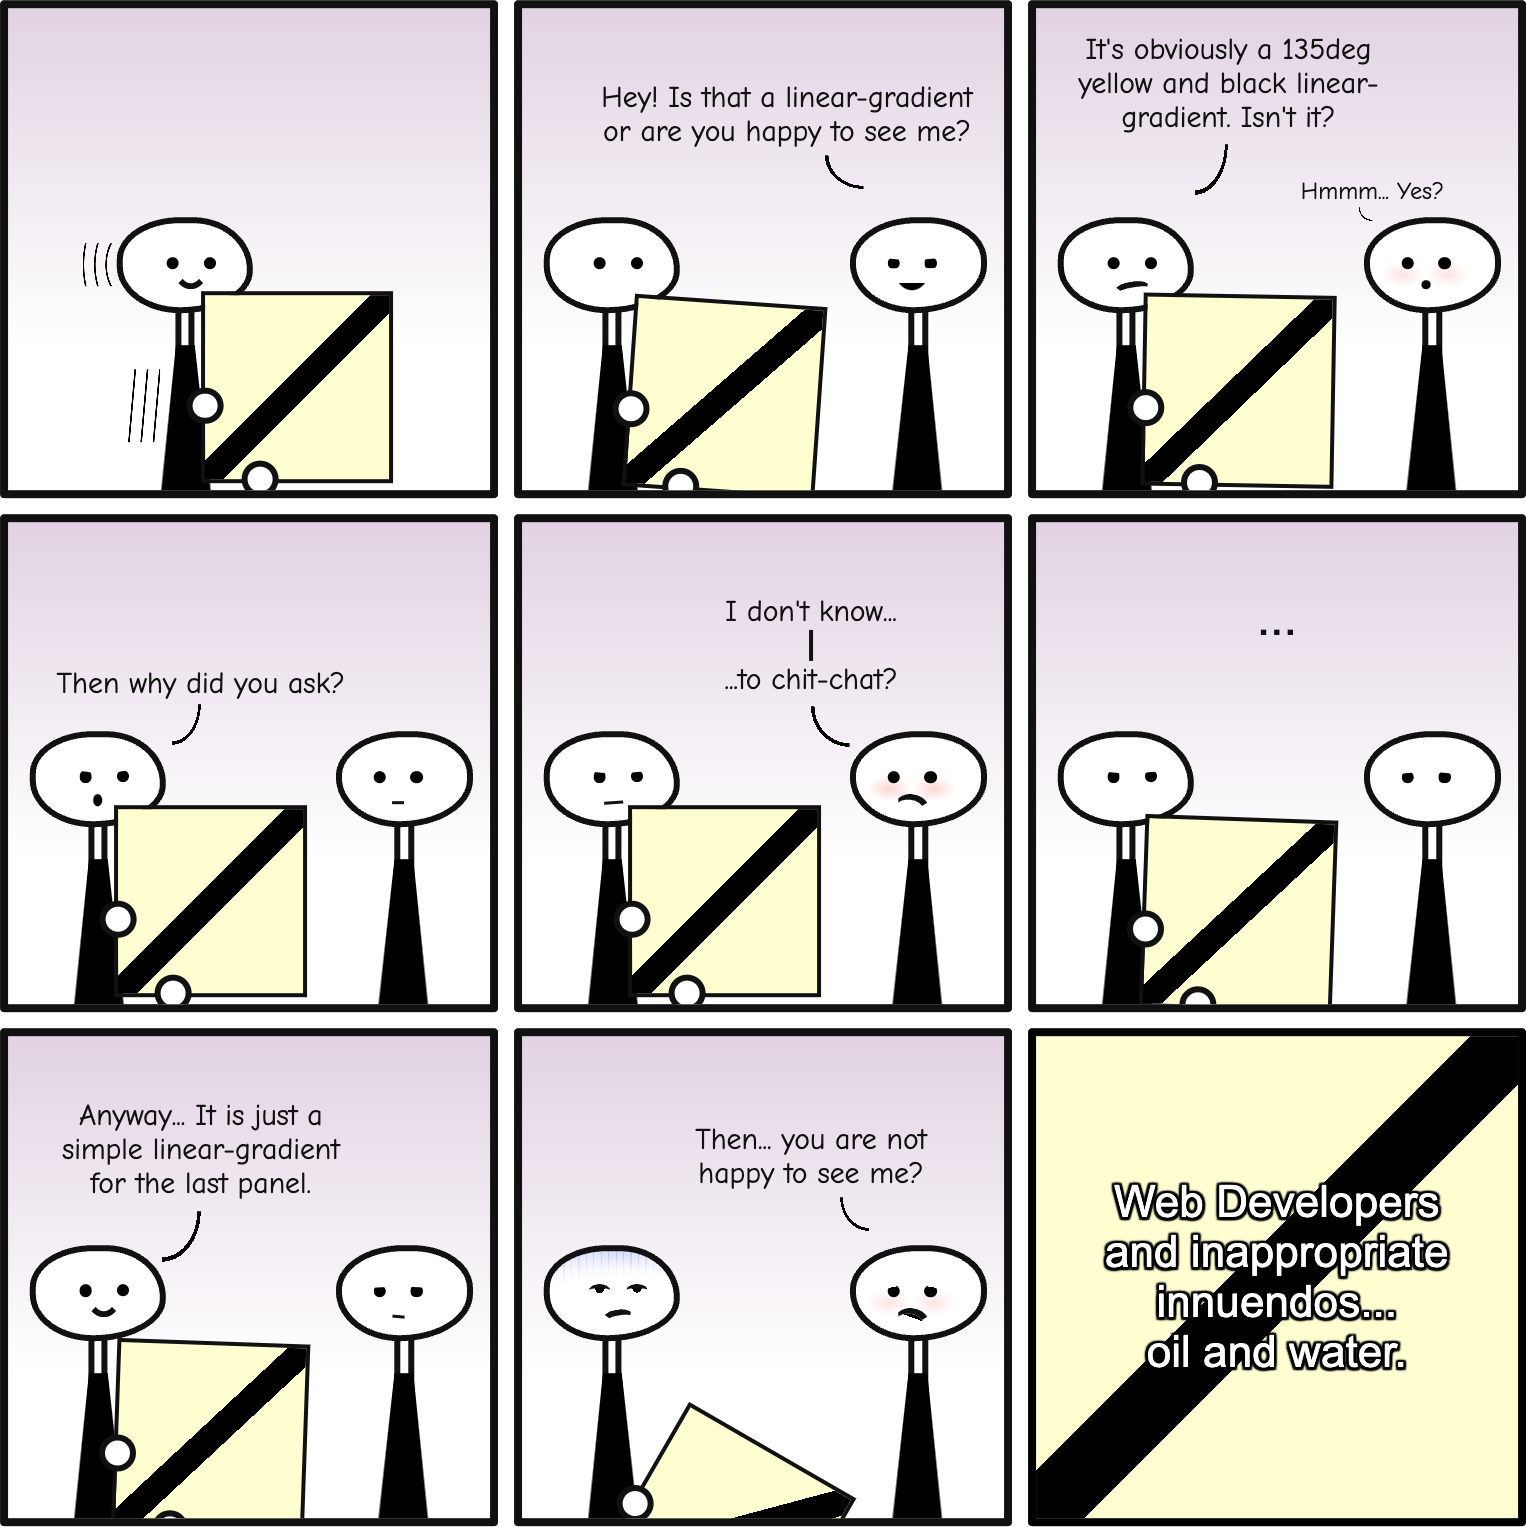 Comic with 9 panels. A character walks carrying a panel with a diagonal line. Another character asks 'Is that a linear-gradient or are you happy to see me?'. The first character replies: 'It is obviously a 135deg yellow and black linear-gradient.' After an awkward exchange, the second character ends shyly: 'then you are not happy to see me?'. The last panel reads 'Web Developers and inappropriate innuendos... oil and water'.